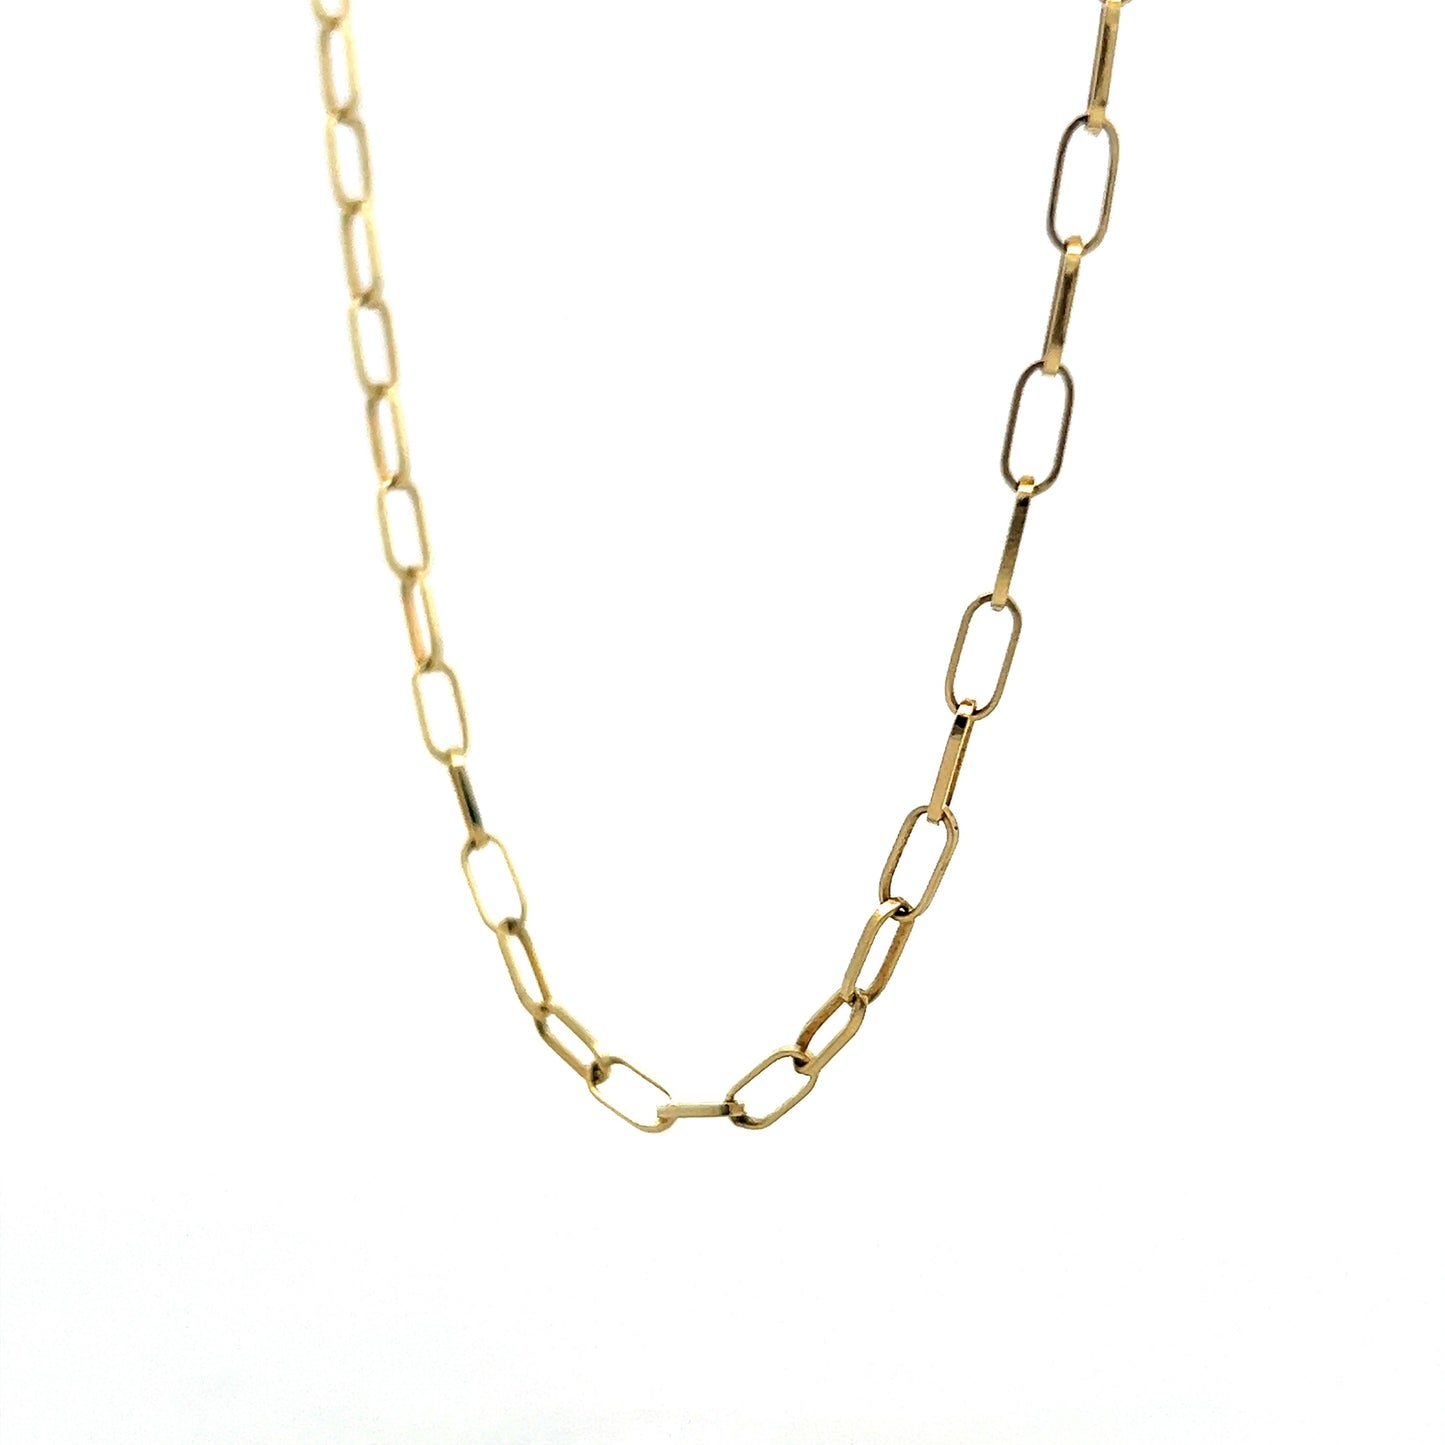 Paperclip Style Chain Necklace in 14k Yellow